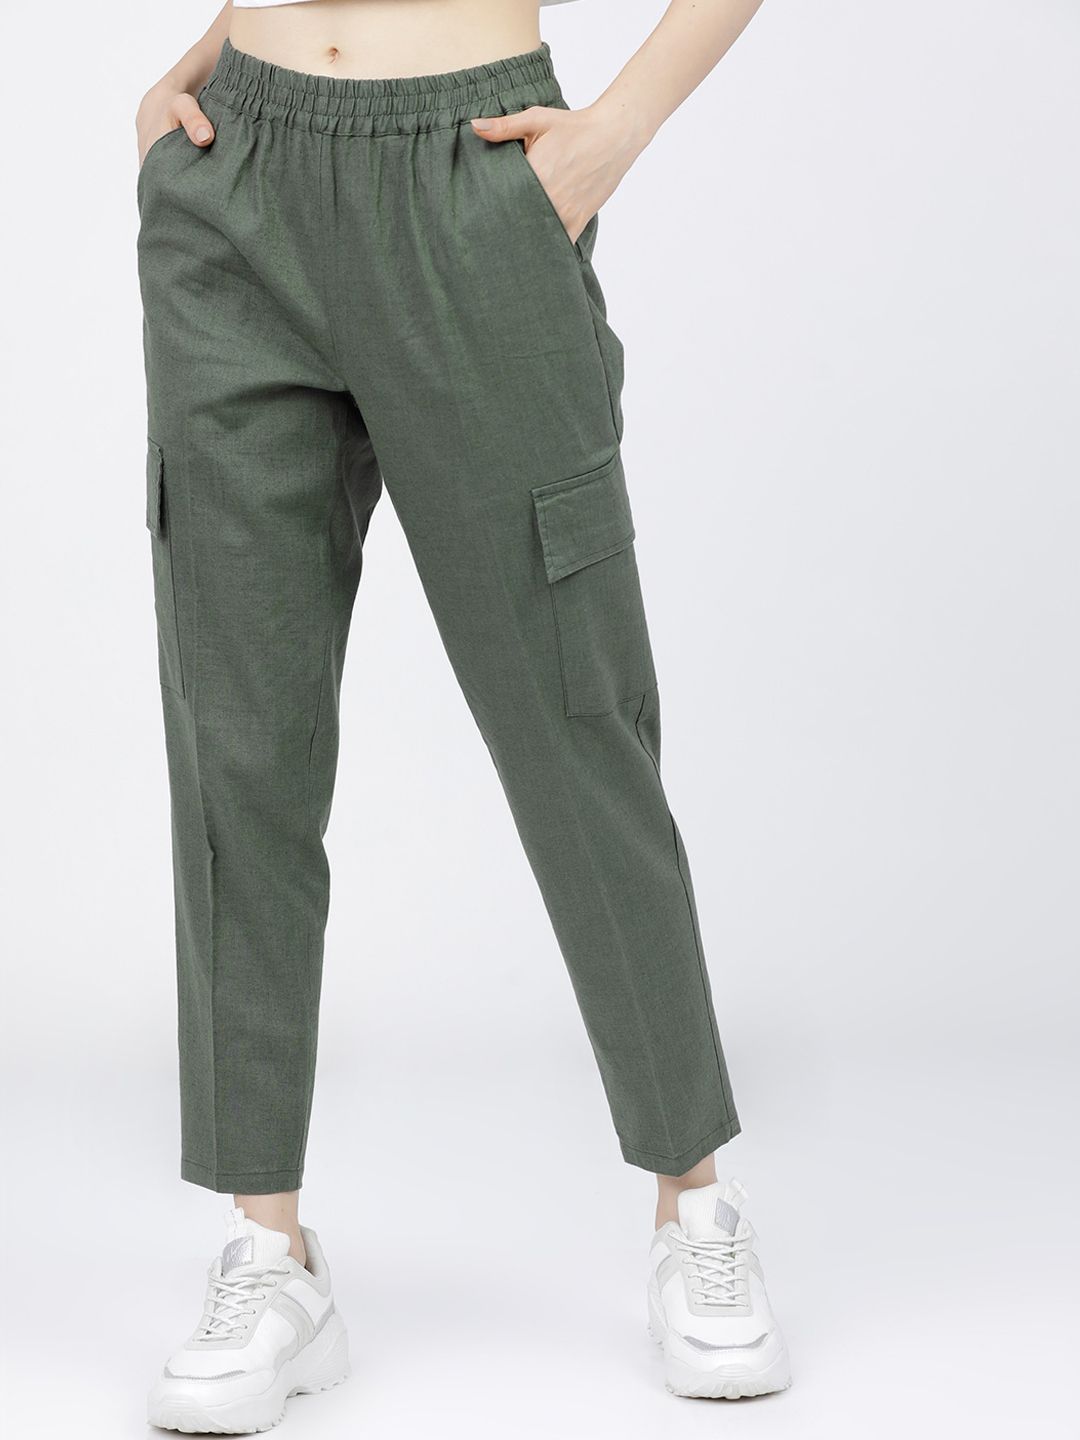 Tokyo Talkies Women Olive Green Cargos Trousers Price in India